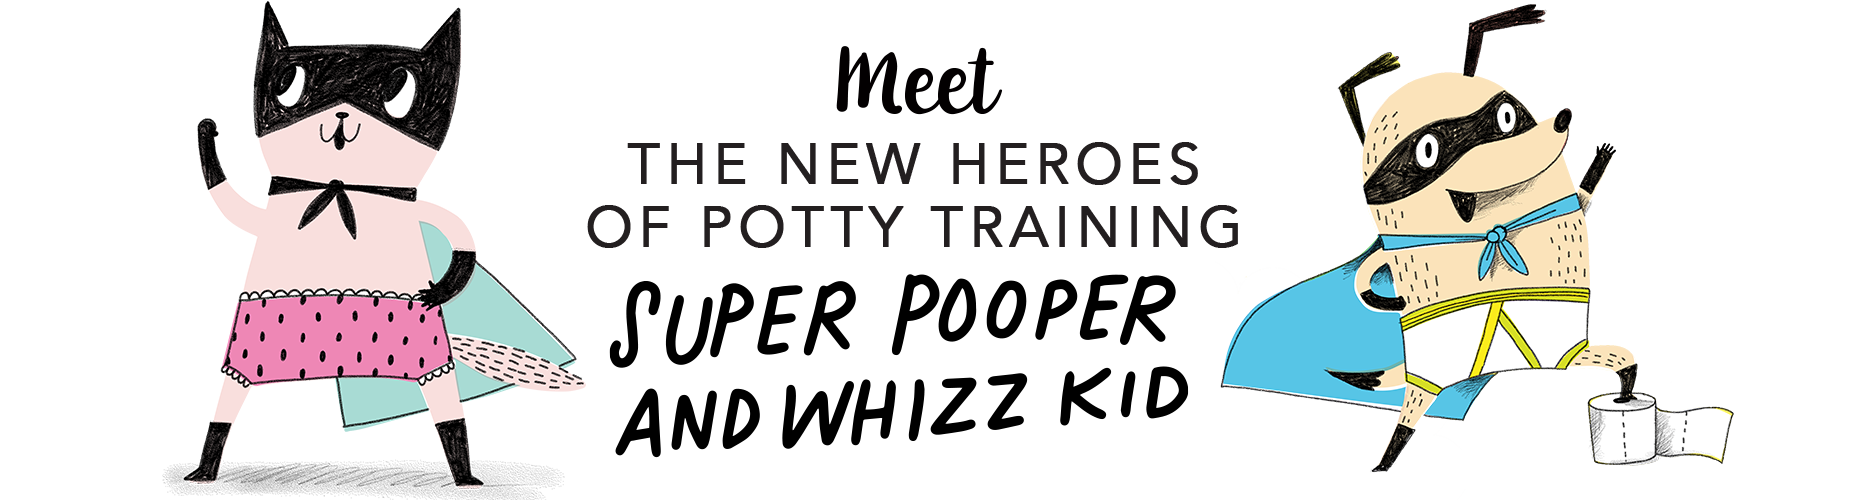 THE NEW HEROES OF POTTY TRAINING